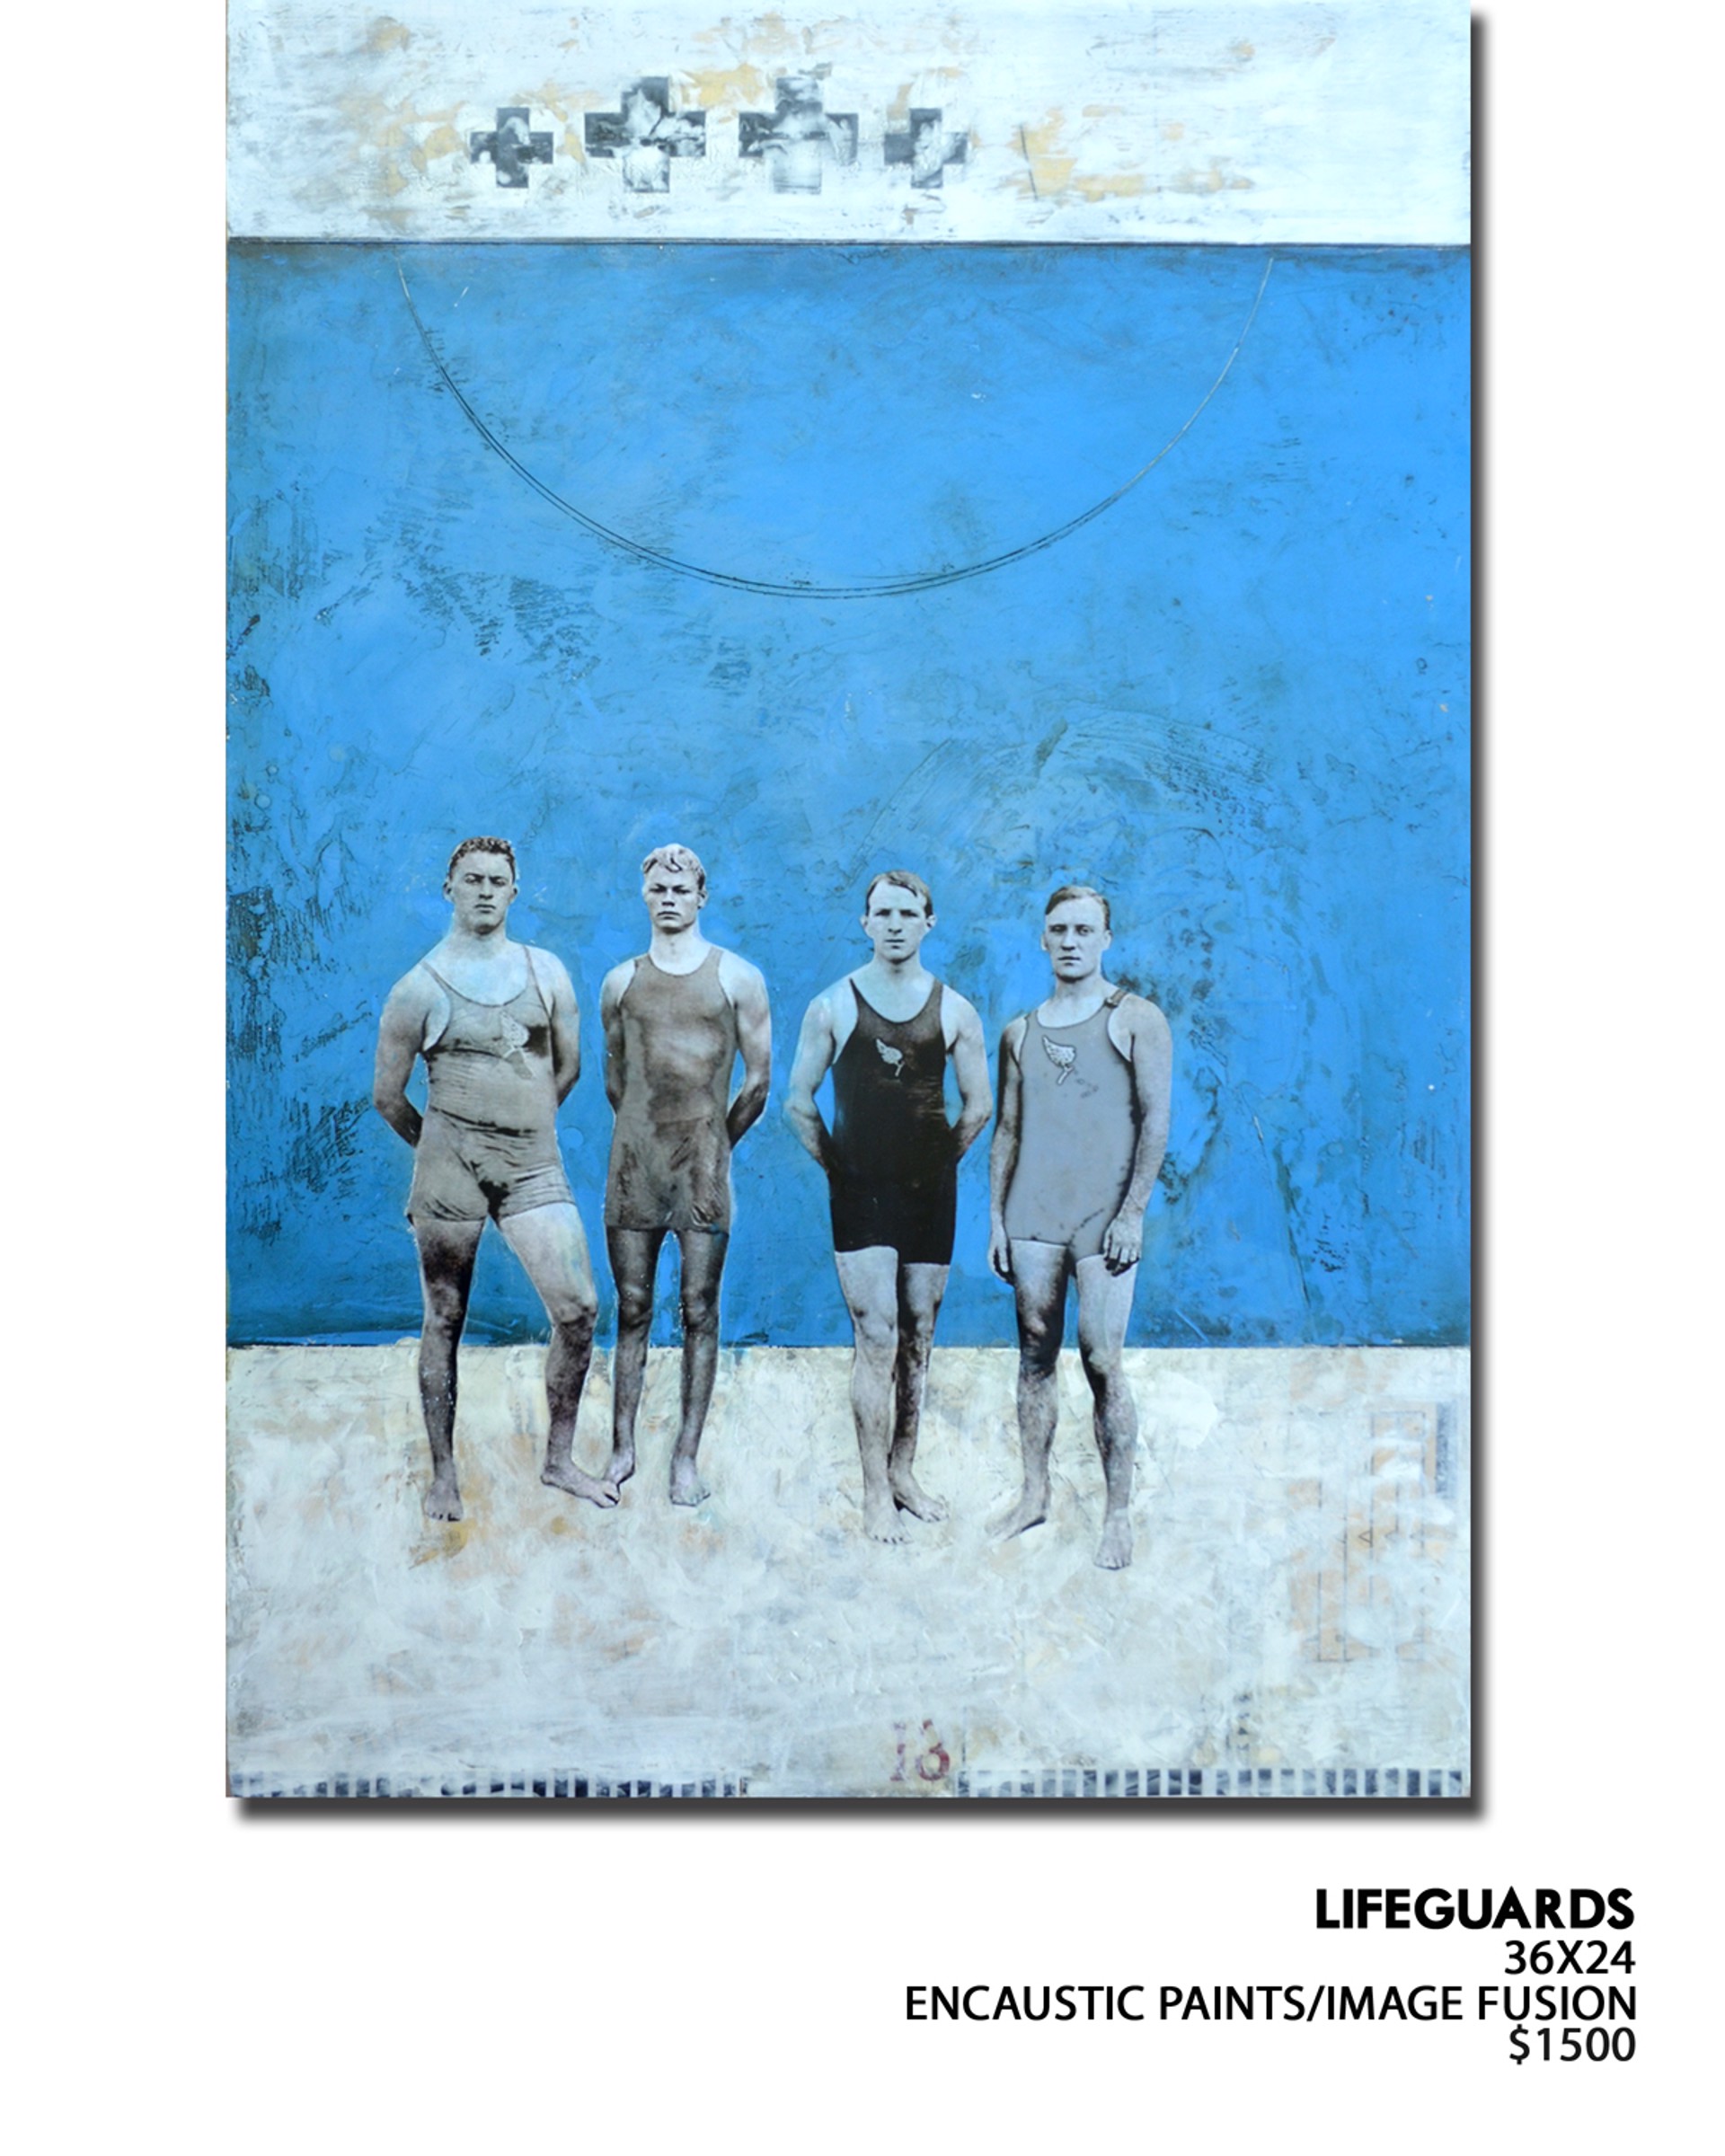 Lifeguards by Ruth Crowe